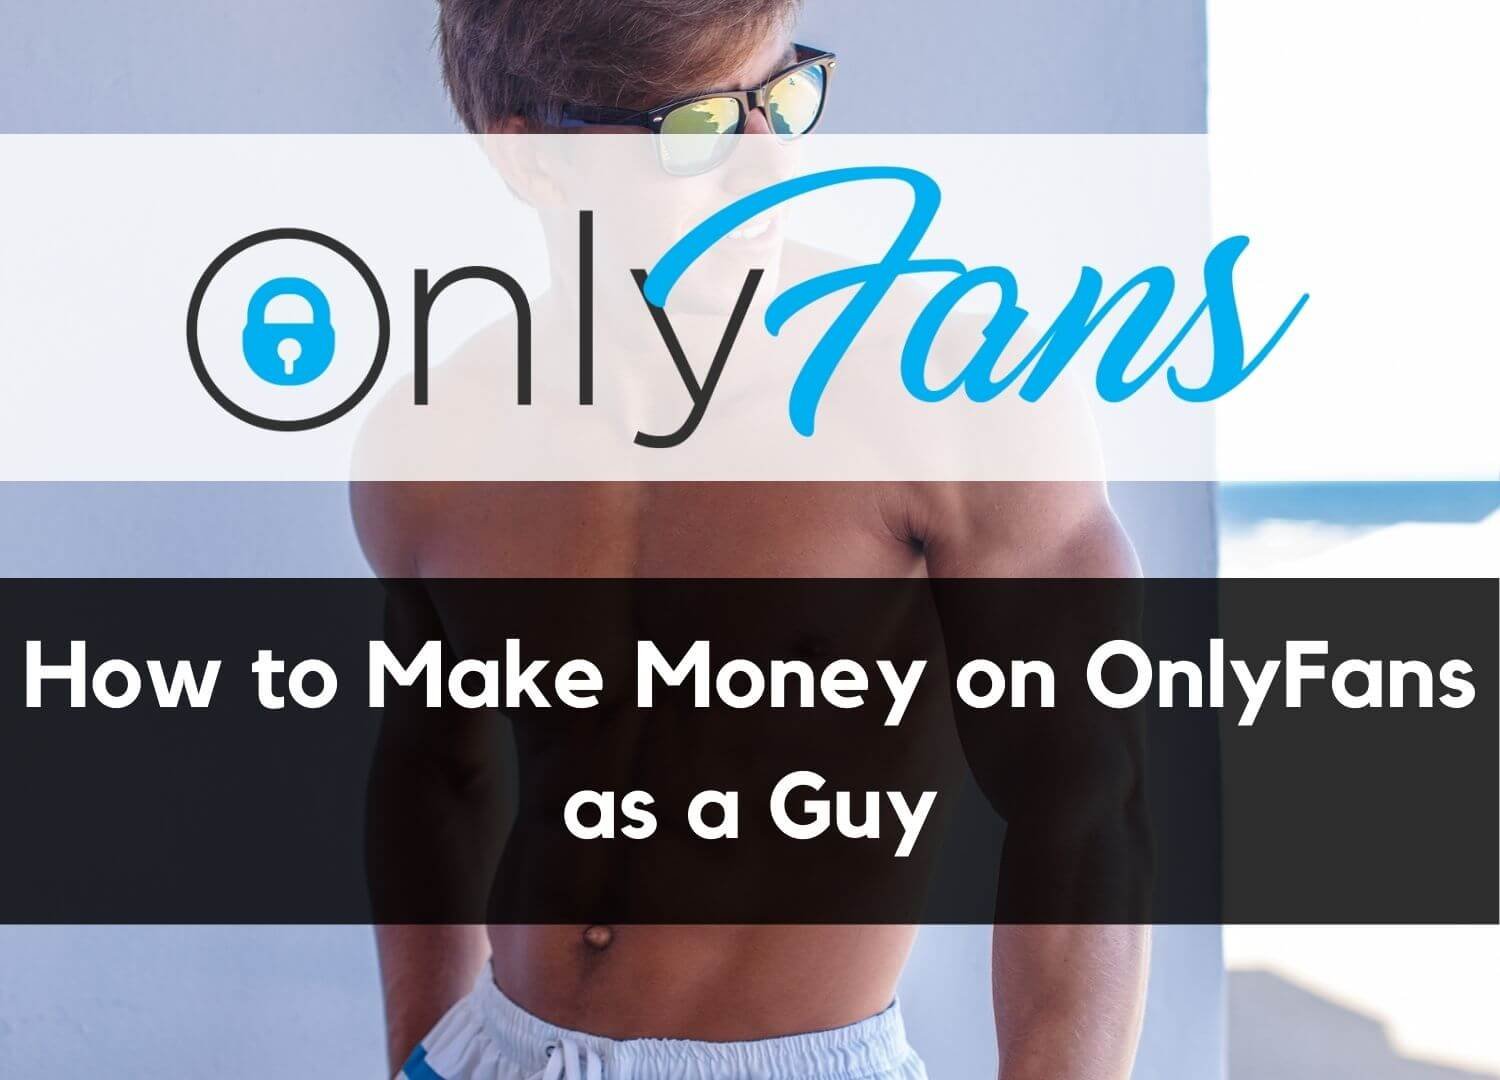 Can you lose money on onlyfans